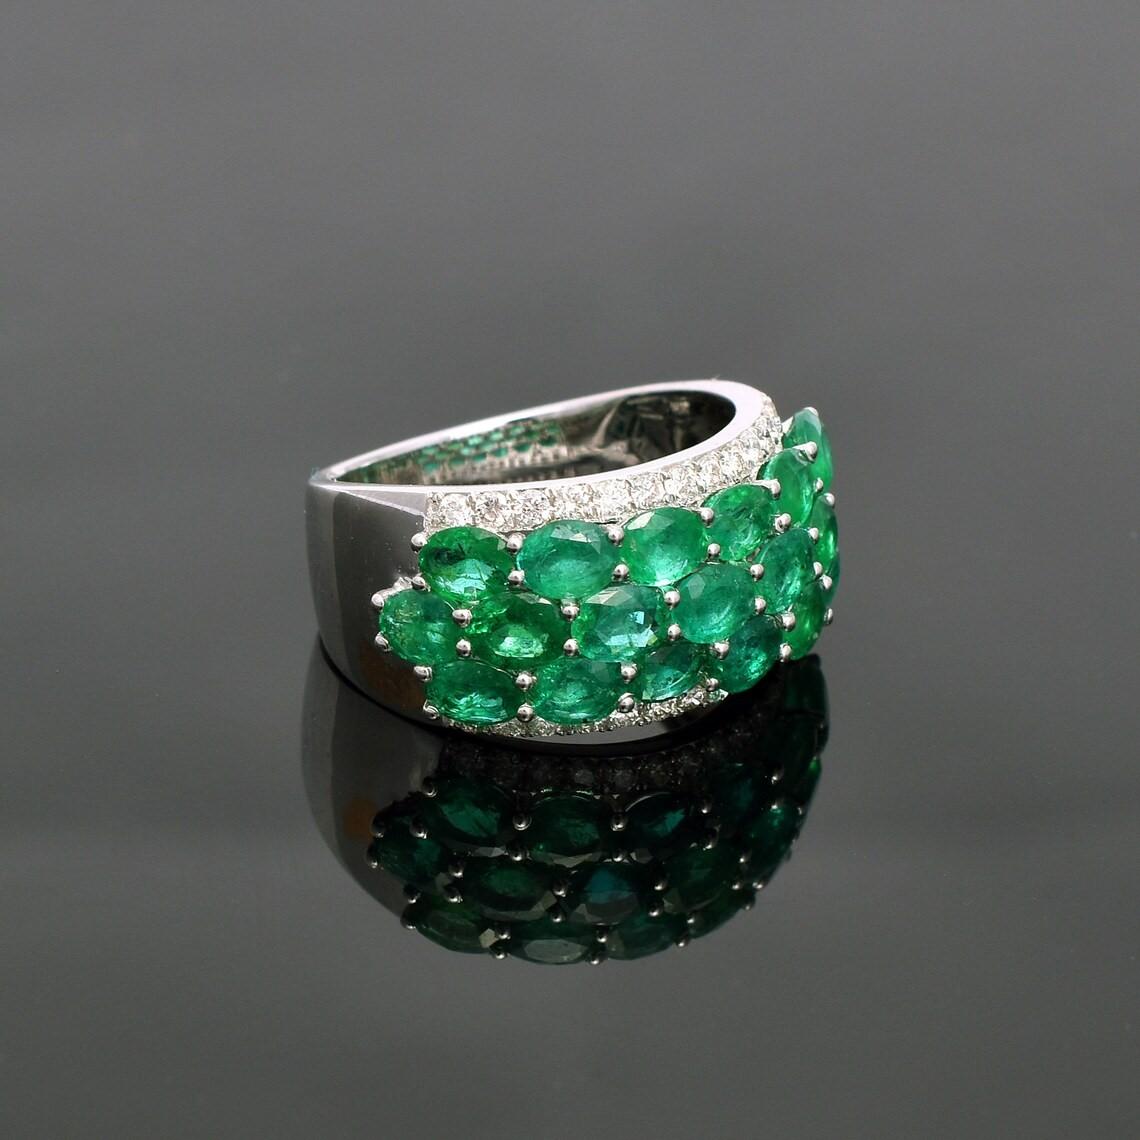 This ring has been meticulously crafted from 18-karat gold.  It is hand set with 3.93 carats emerald & .36 carats of sparkling diamonds. 

The ring is a size 7 and may be resized to larger or smaller upon request. 
FOLLOW  MEGHNA JEWELS storefront